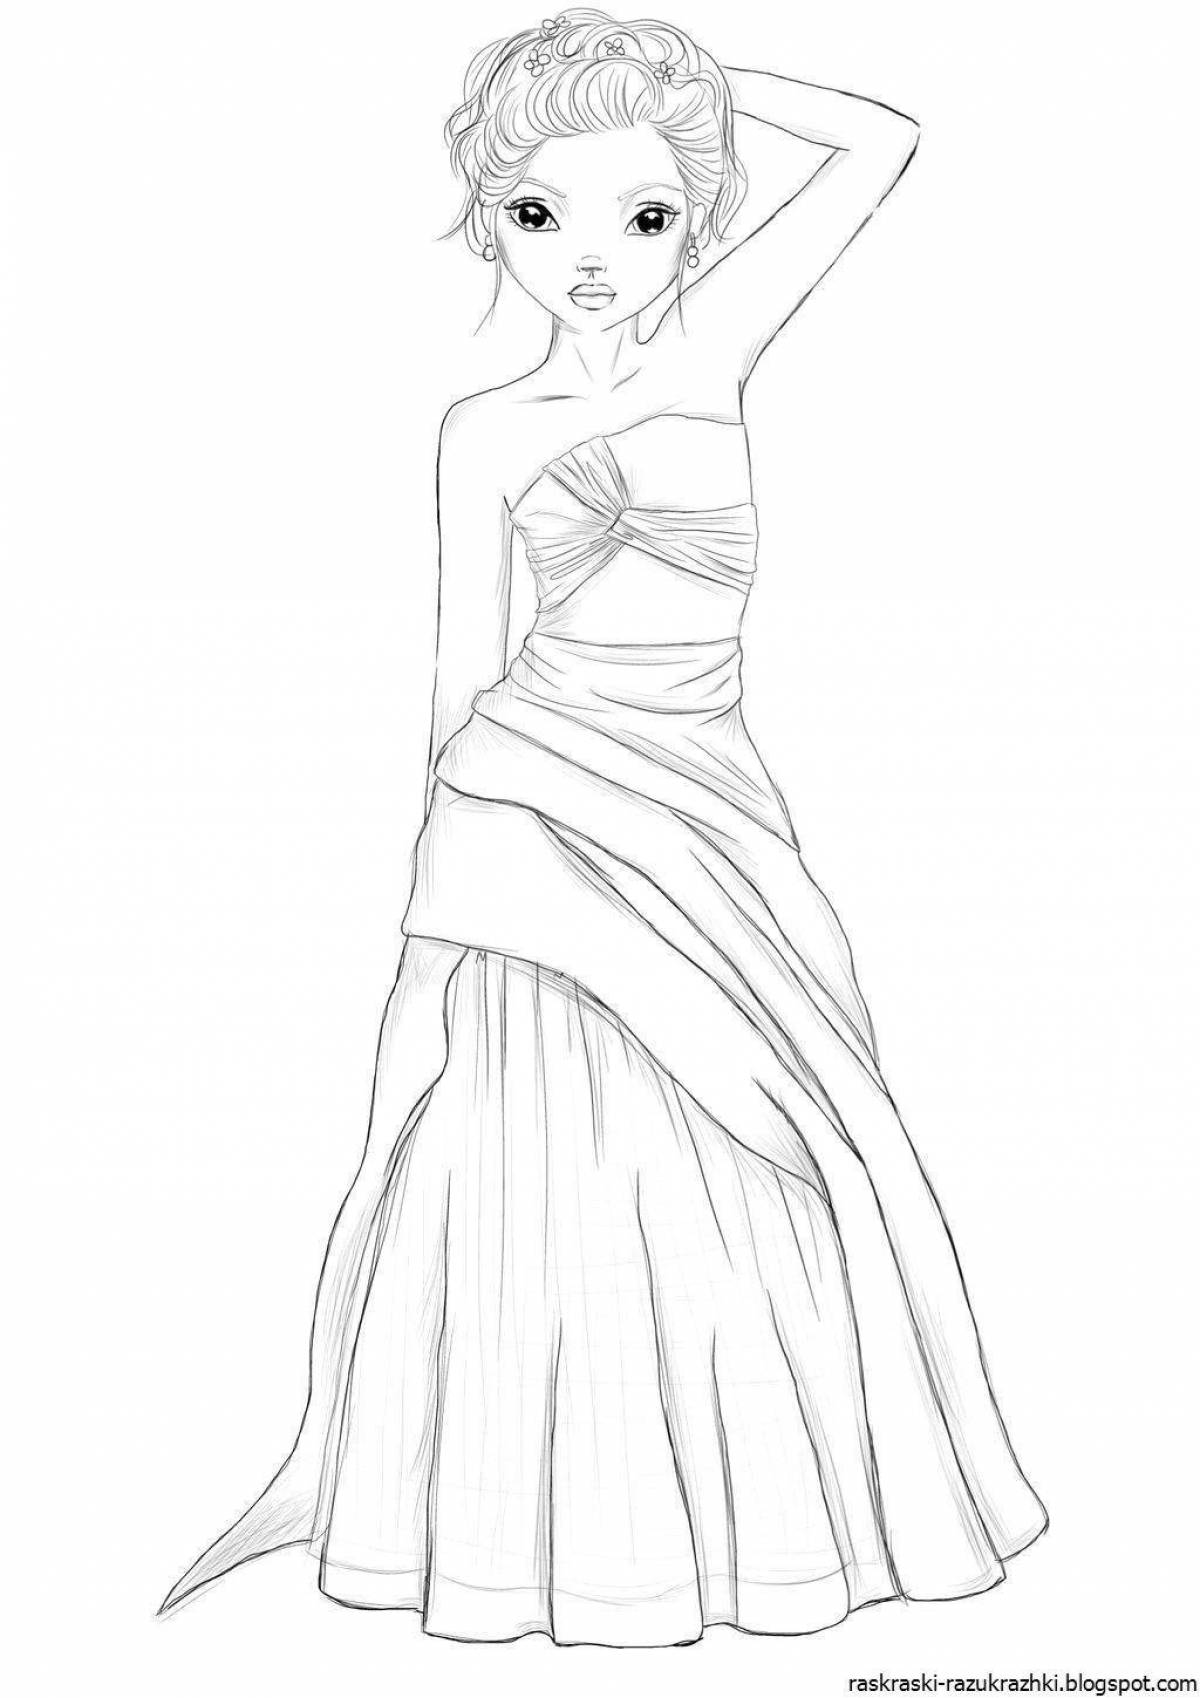 Amazing Top Model magazine coloring page